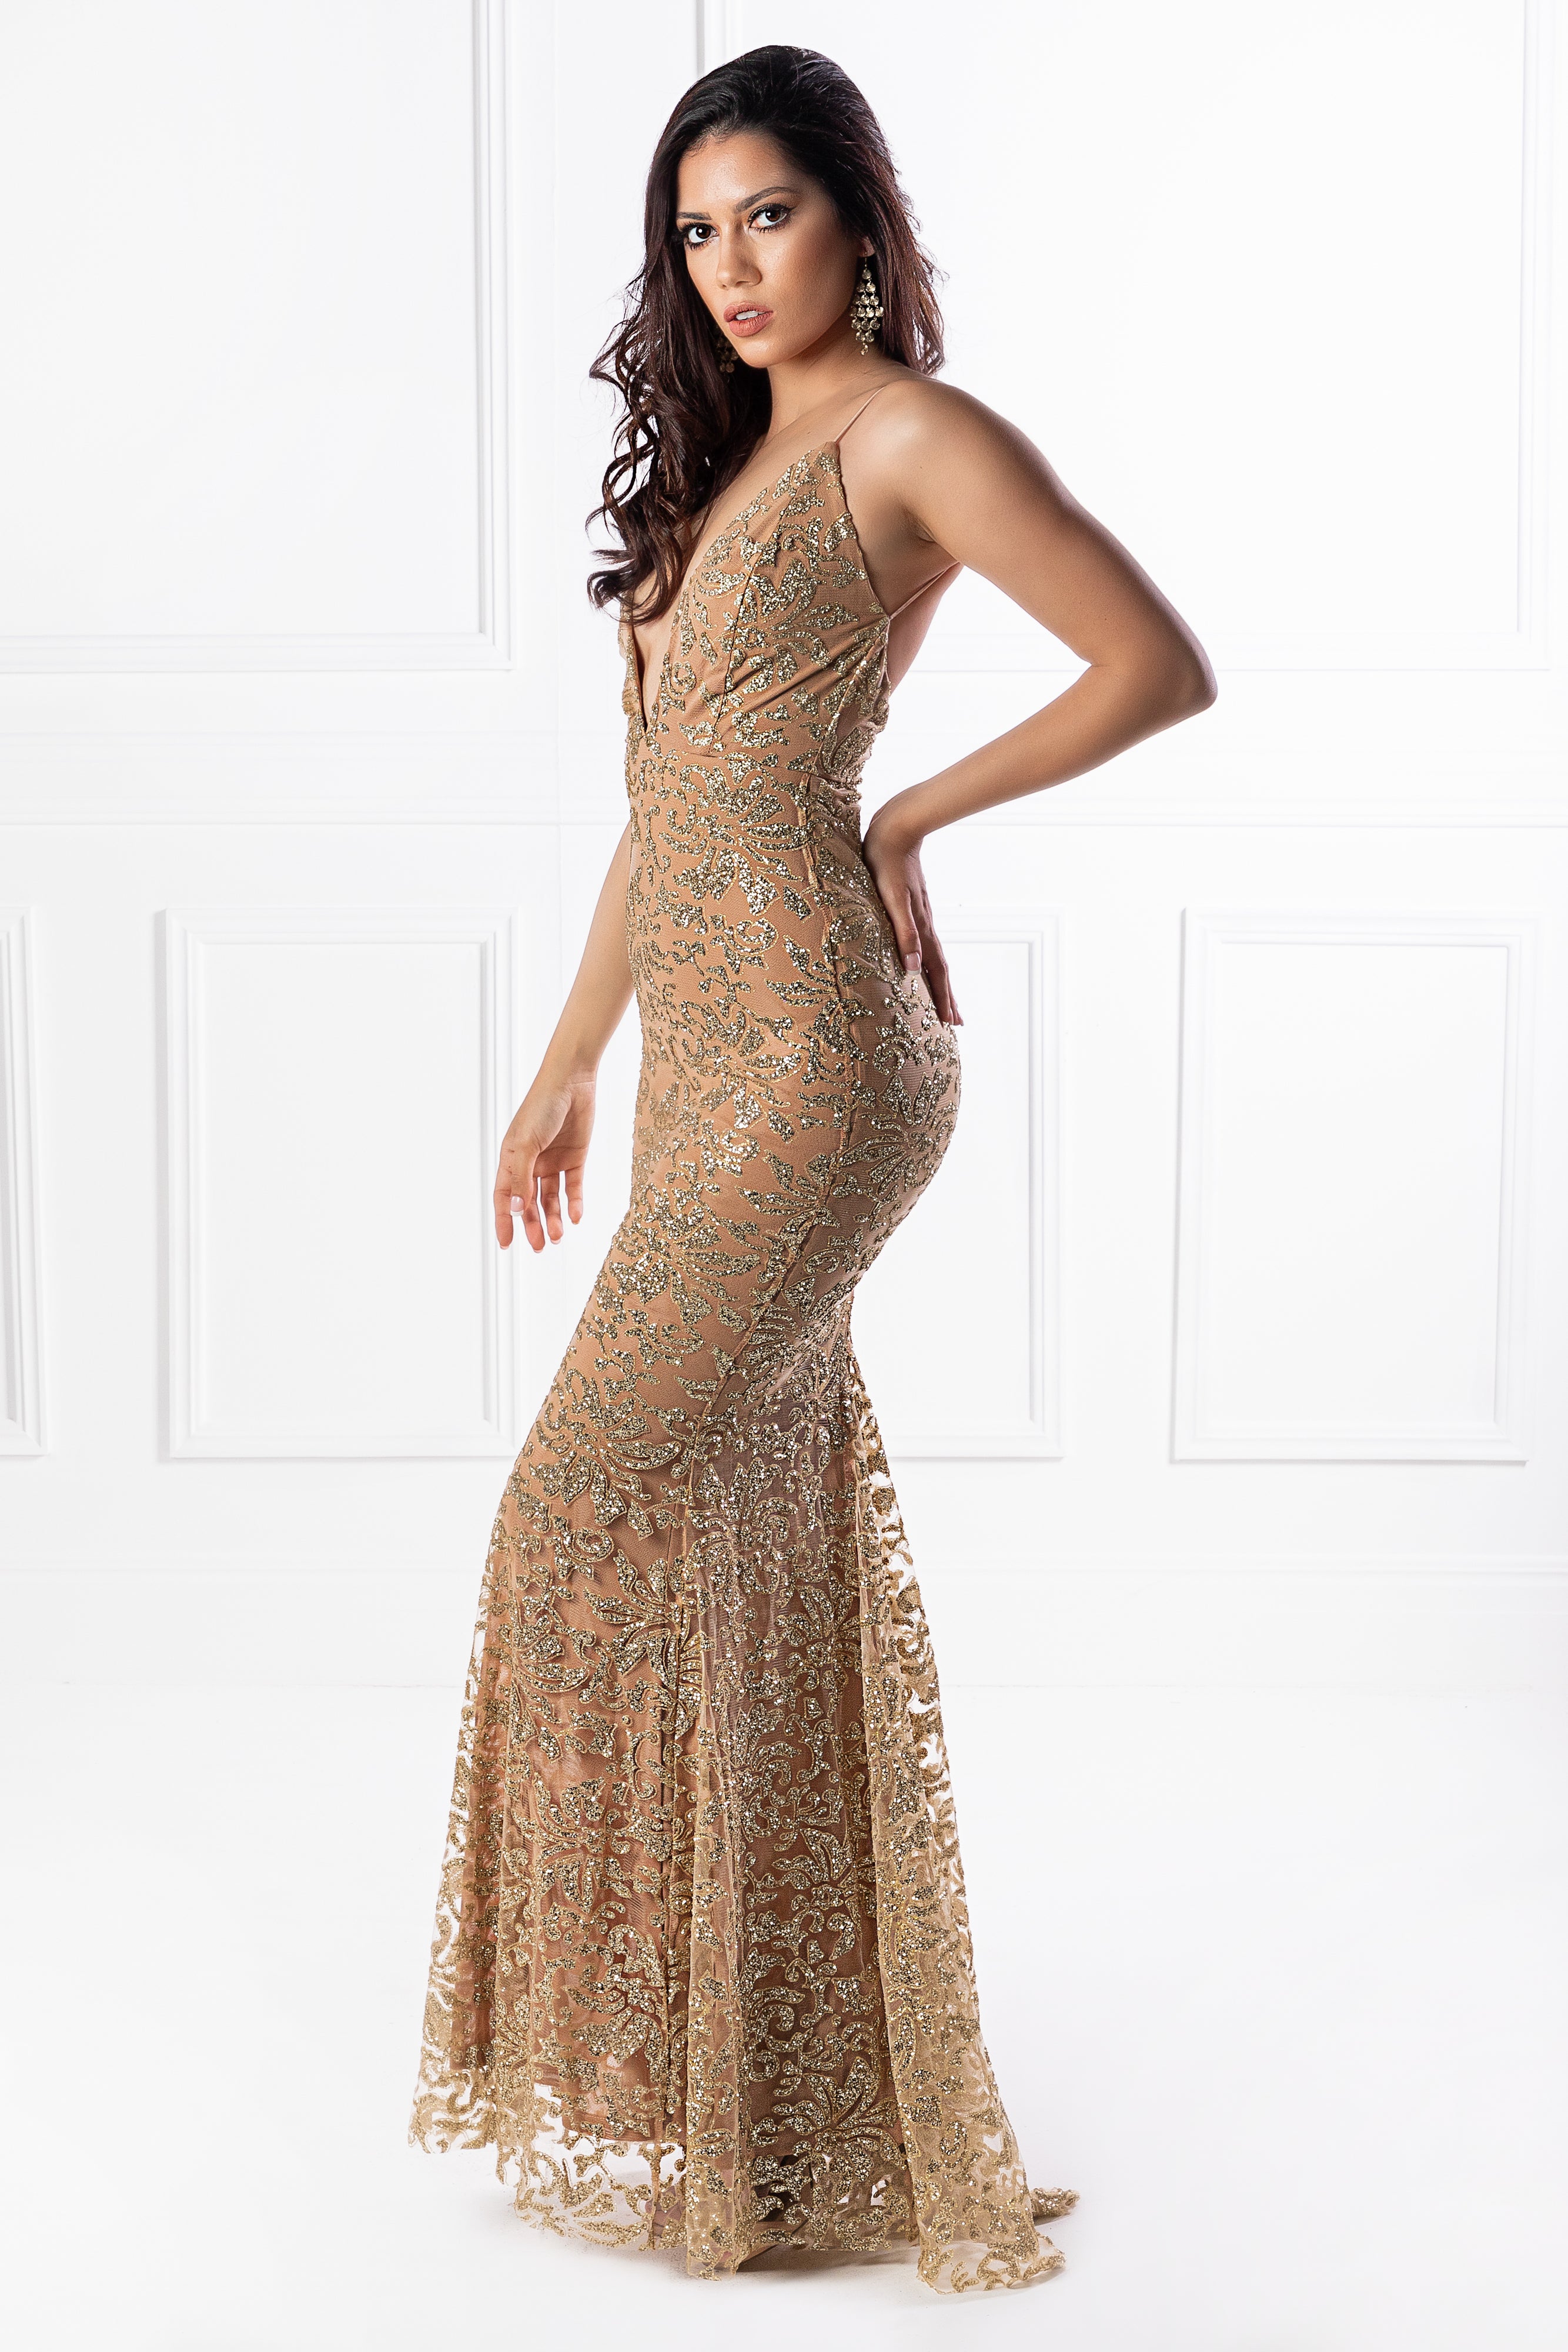 Honey Couture ETTA Gold Lace &amp; Glitter Overlay Mermaid Formal Gown Dress {vendor} AfterPay Humm ZipPay LayBuy Sezzle